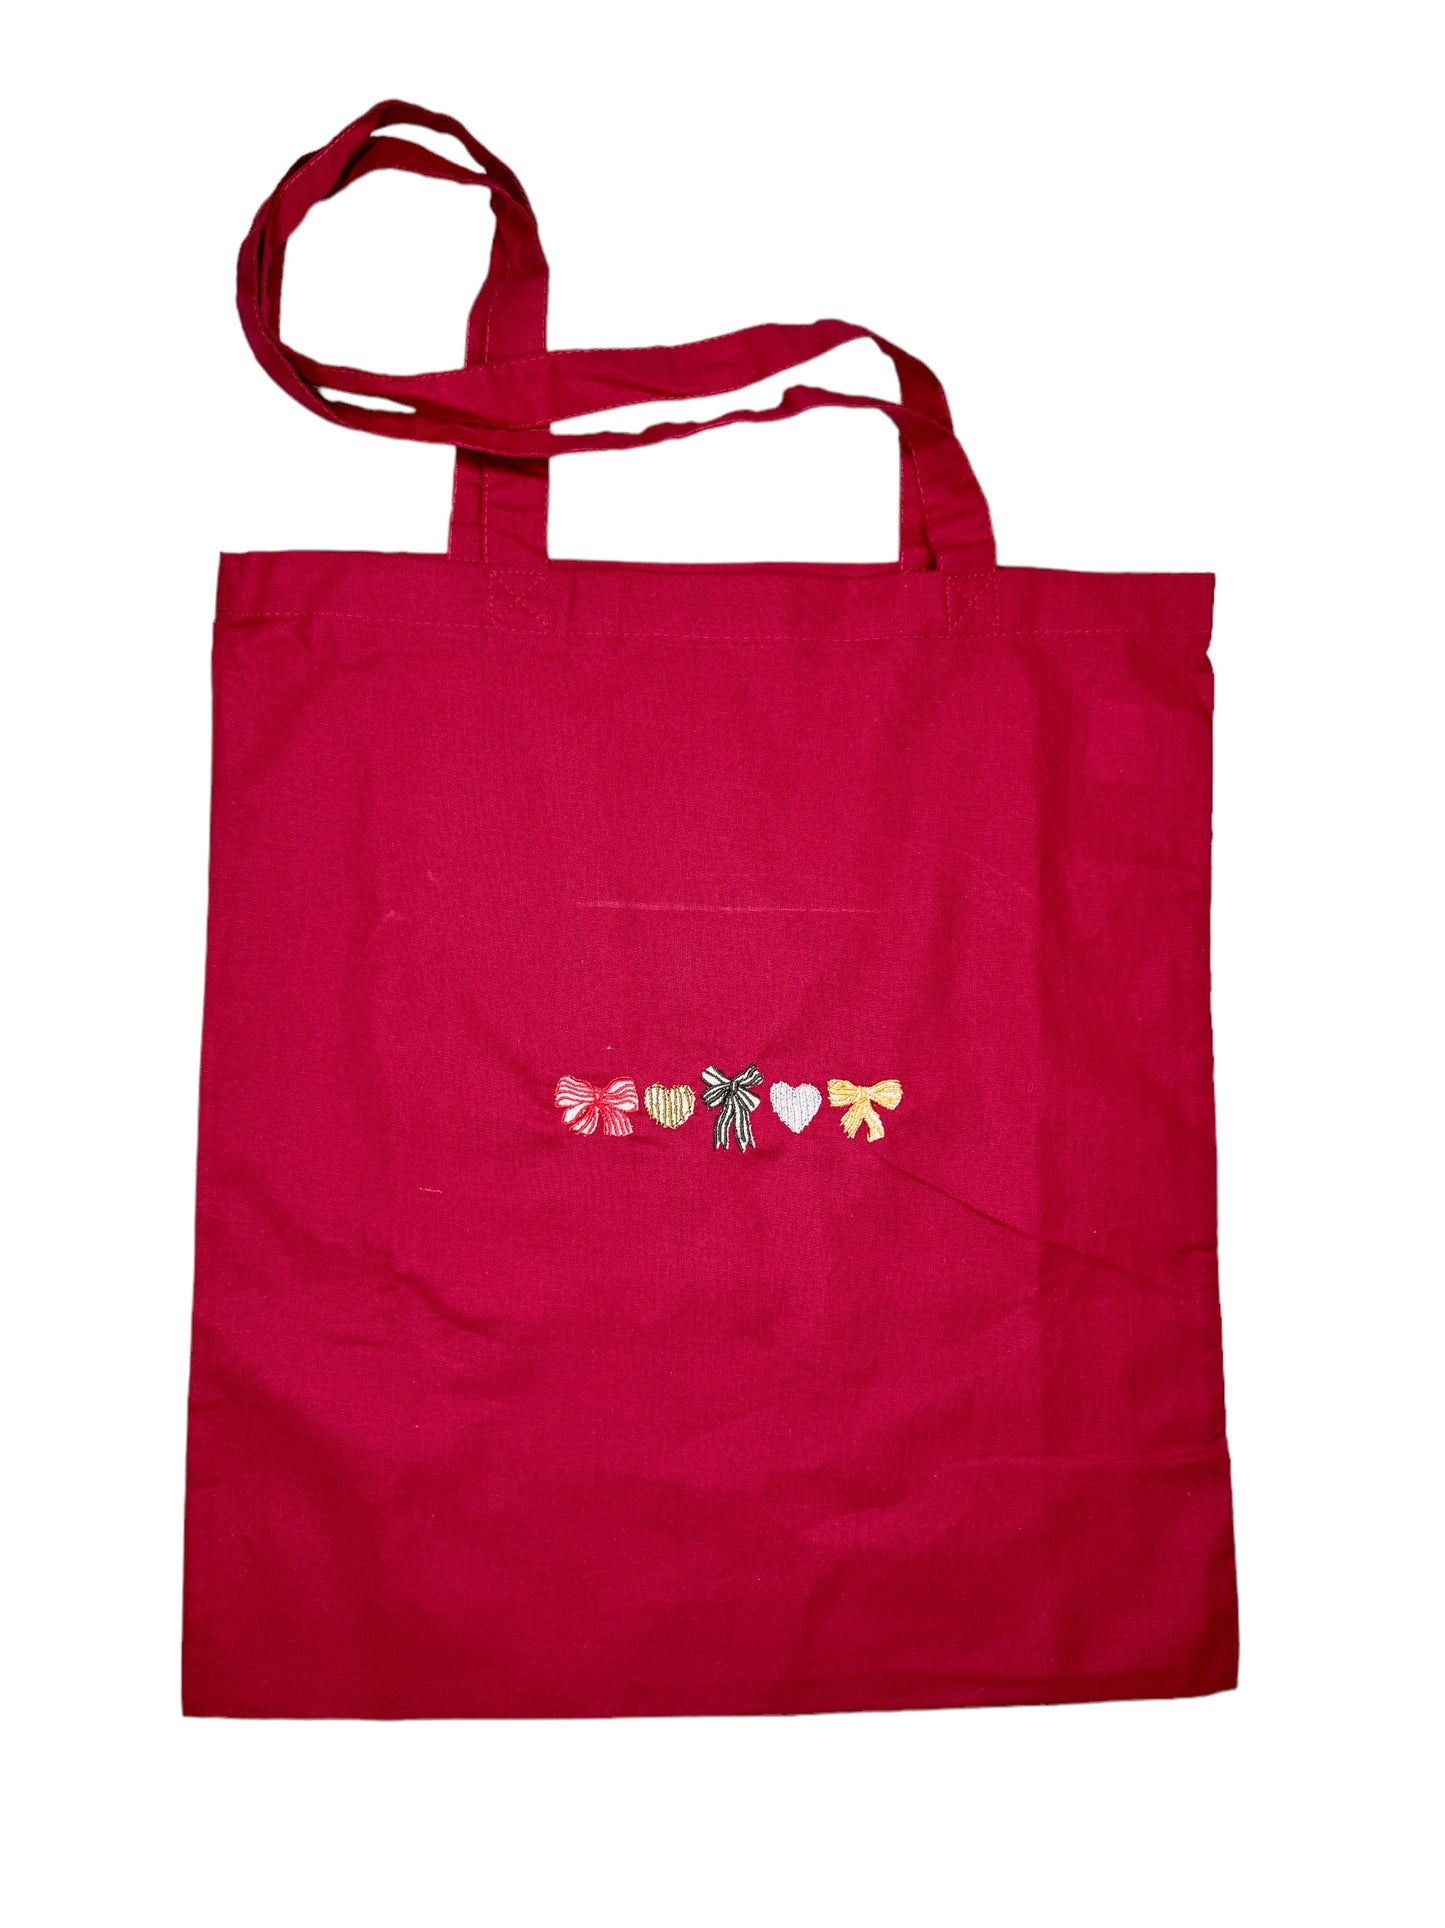 Embroidered Cotton Shoulder Tote Bag - 'My Dainty Love'